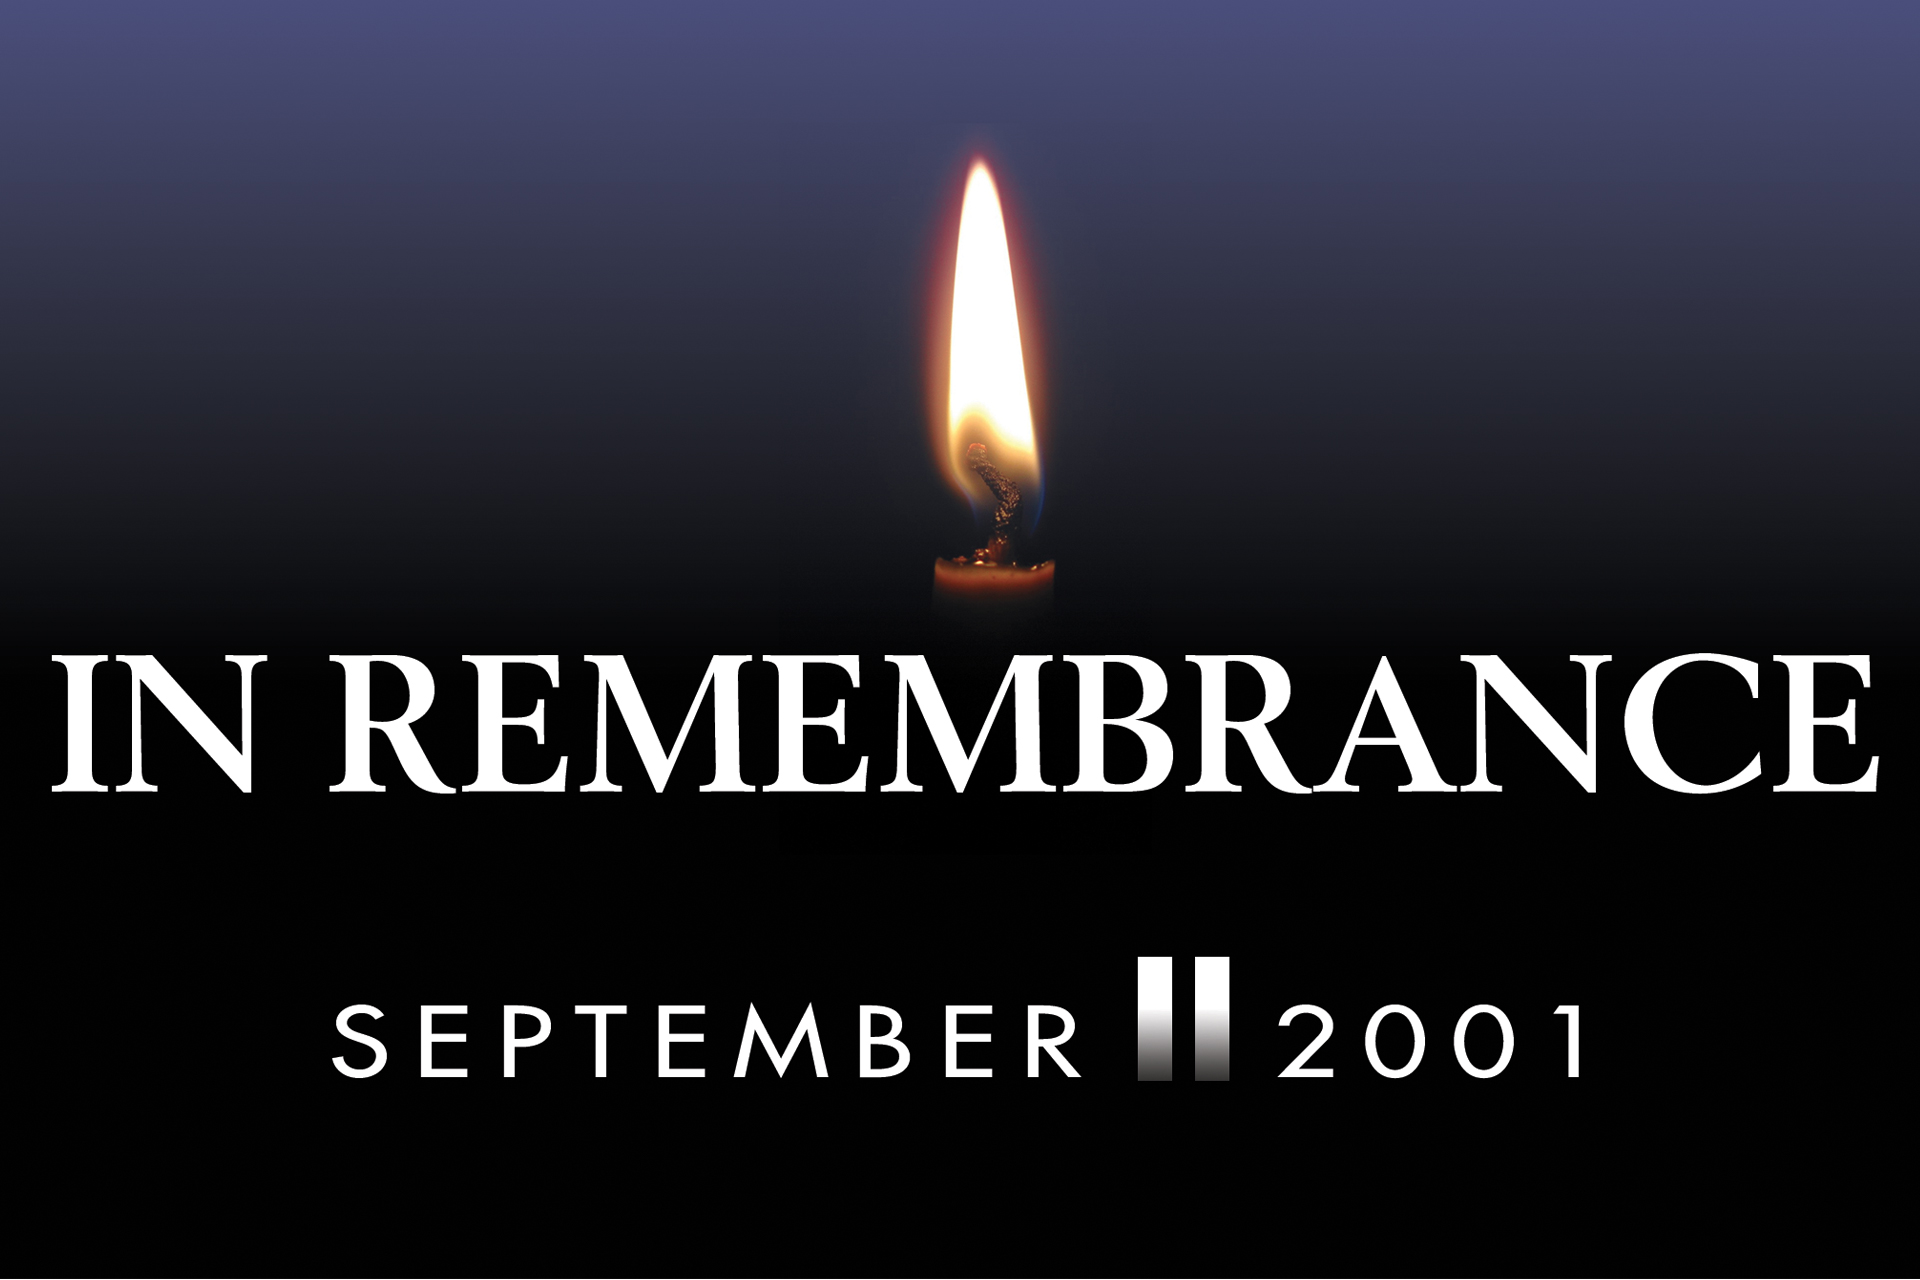 78pm 9/11 Meditation Compassion and Remembrance Meditation and